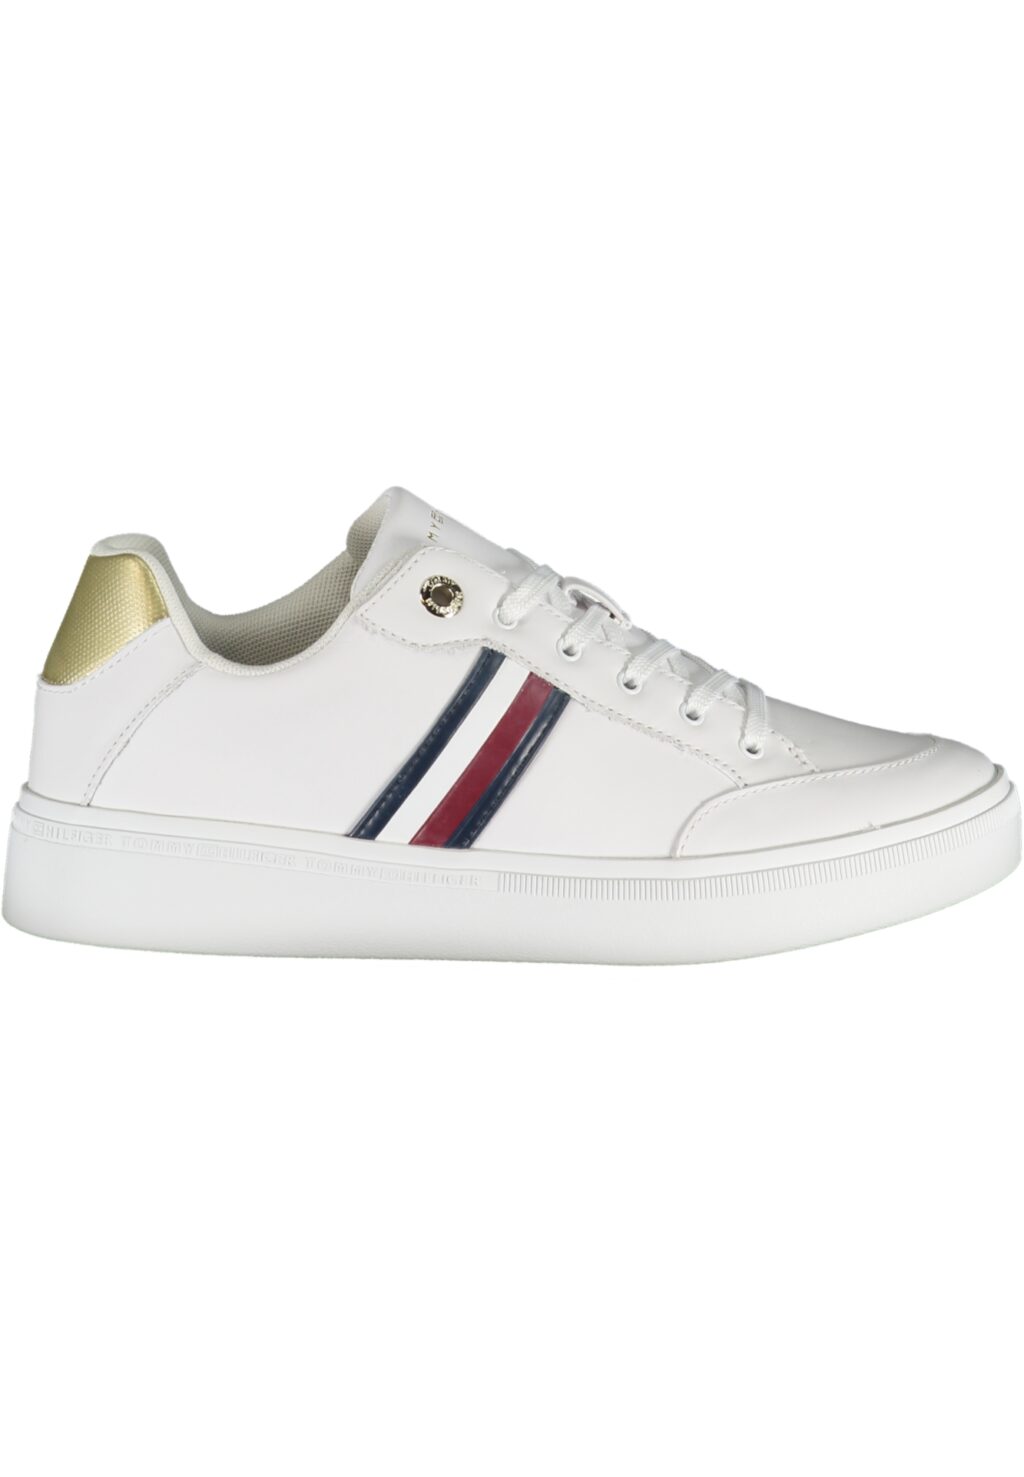 TOMMY HILFIGER WHITE WOMEN'S SPORTS SHOES FW0FW07446F_BIYBS